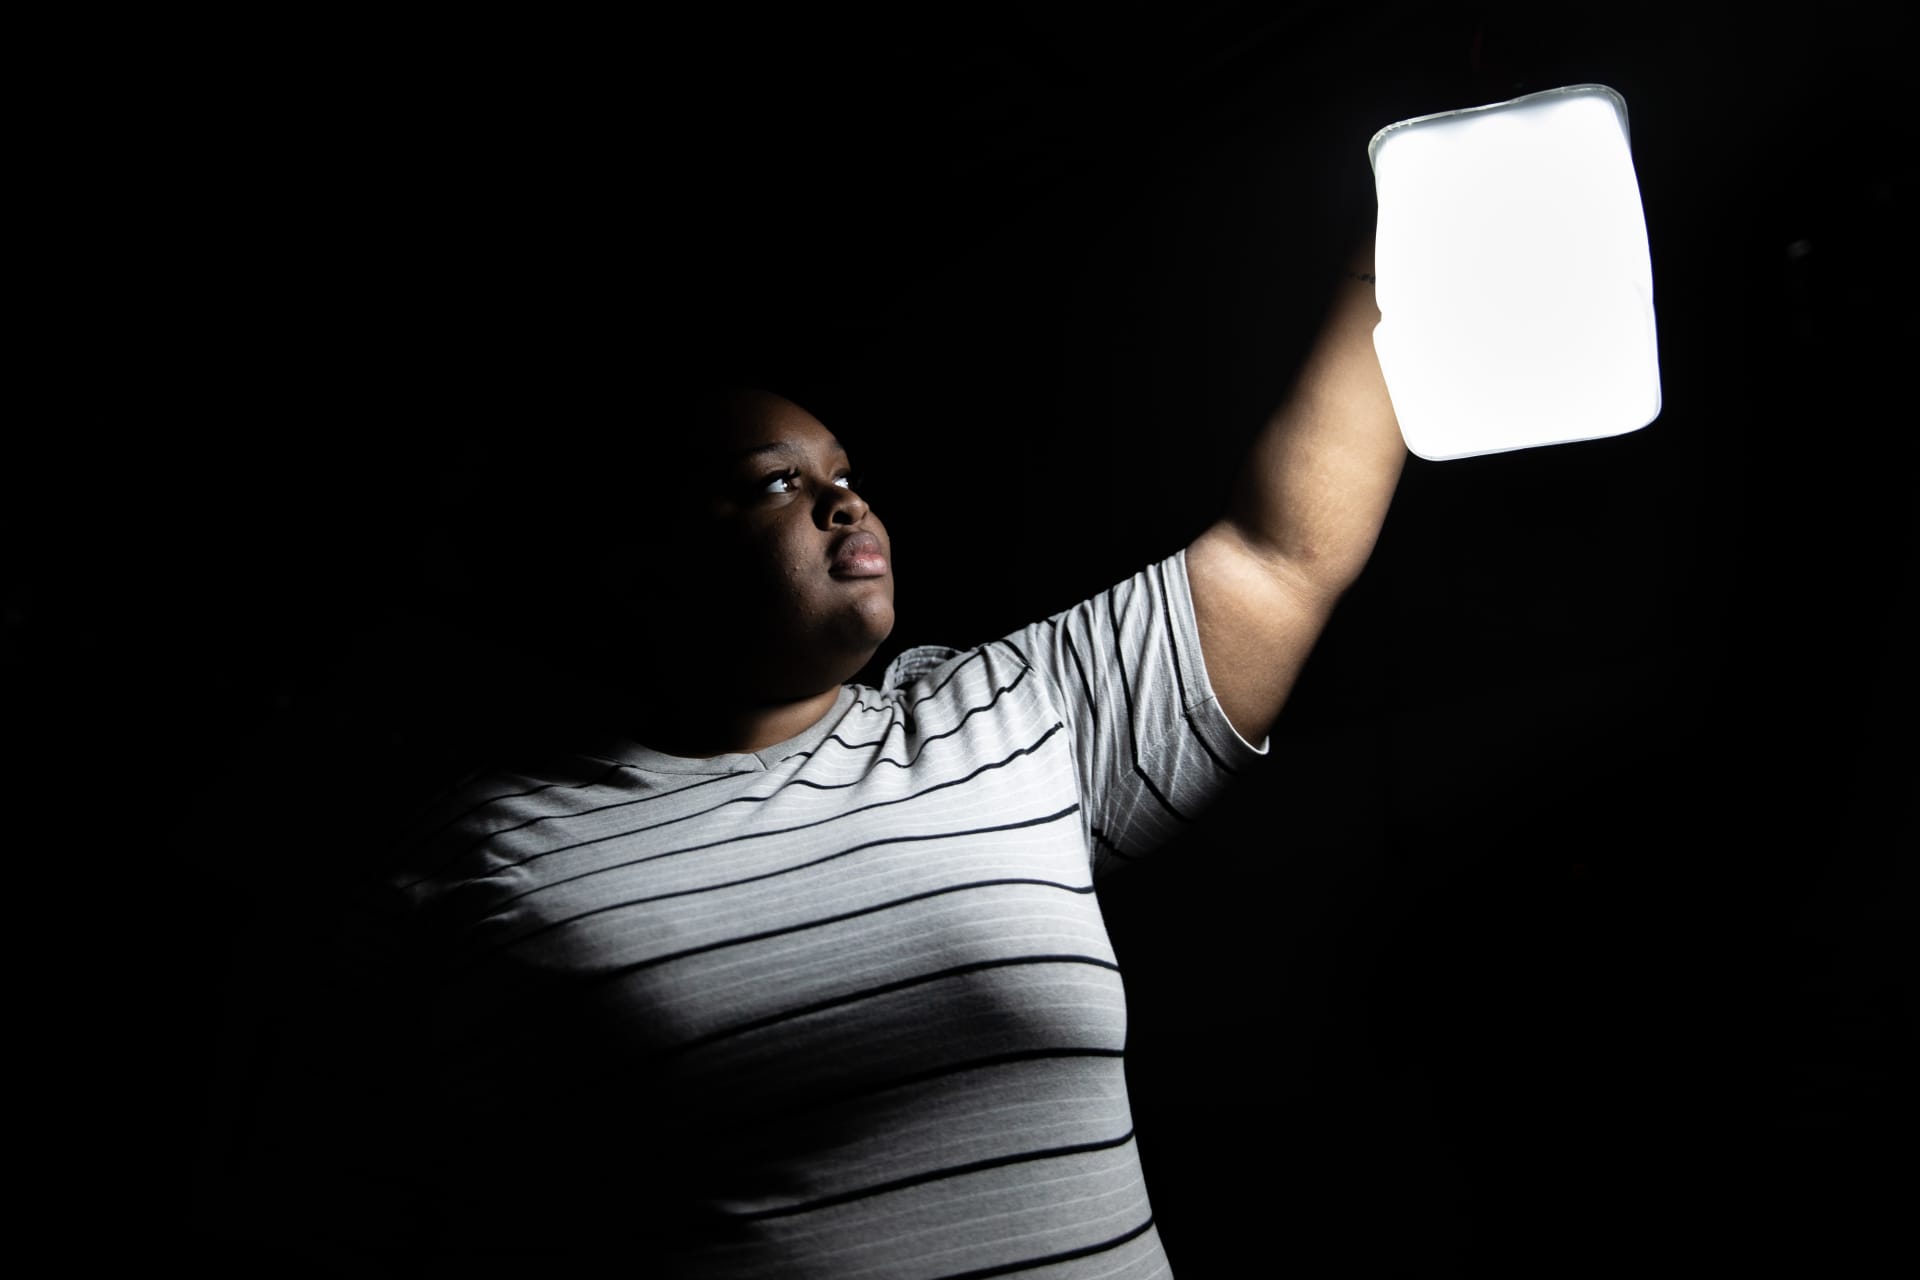 A person holding up a white sign in a dark room.